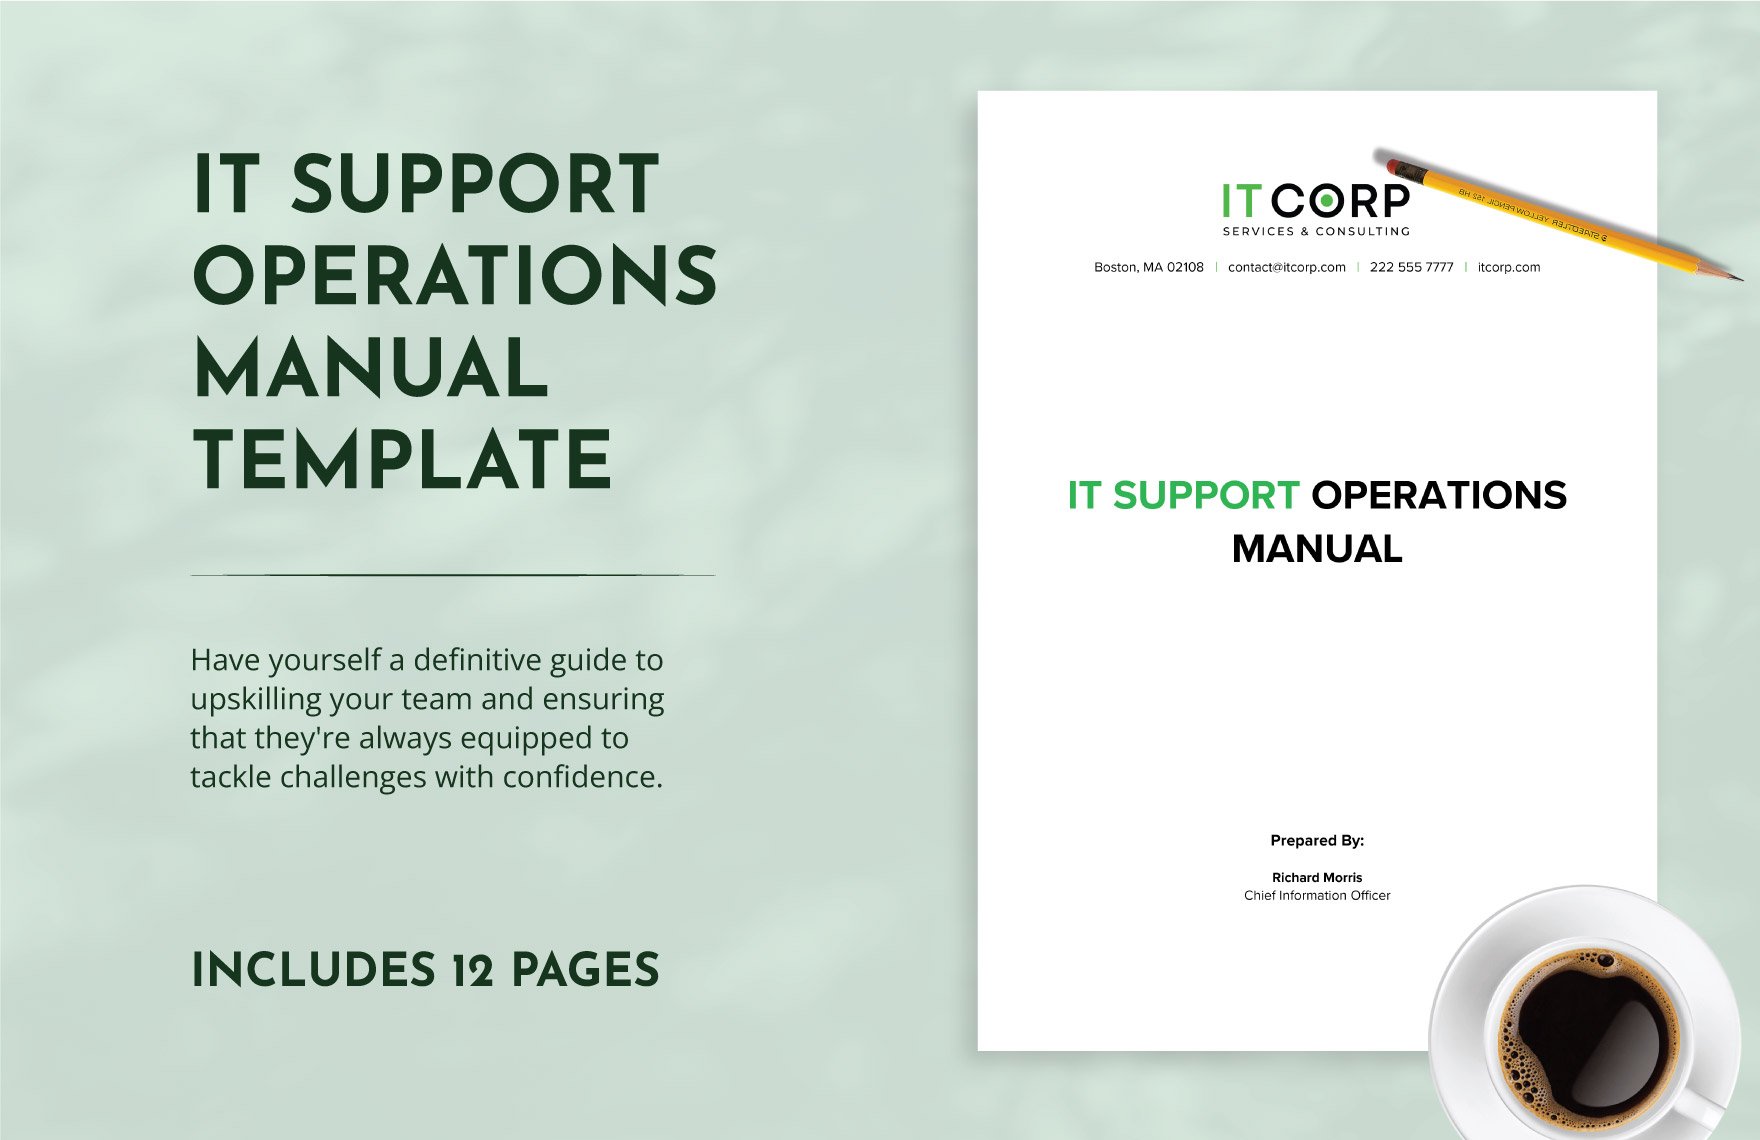 IT Support Operations Manual Template